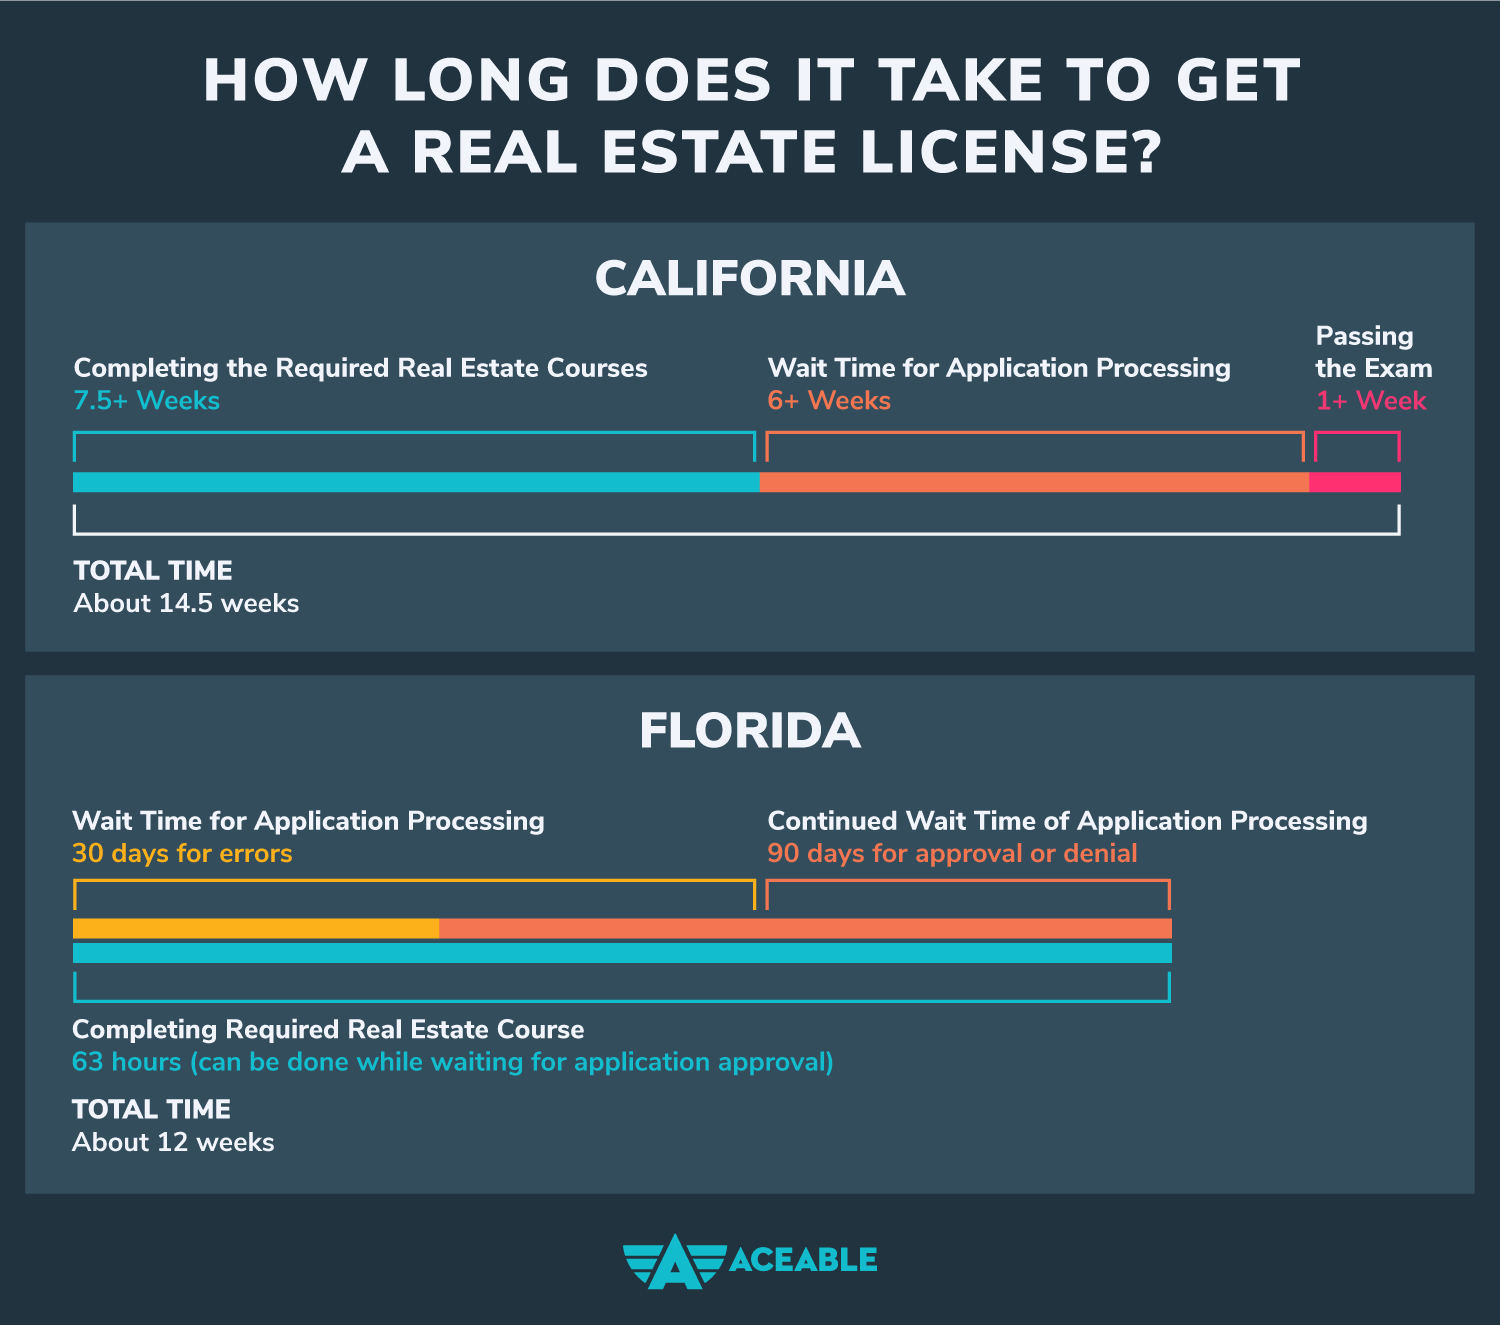 How long does it take to get a real estate license?